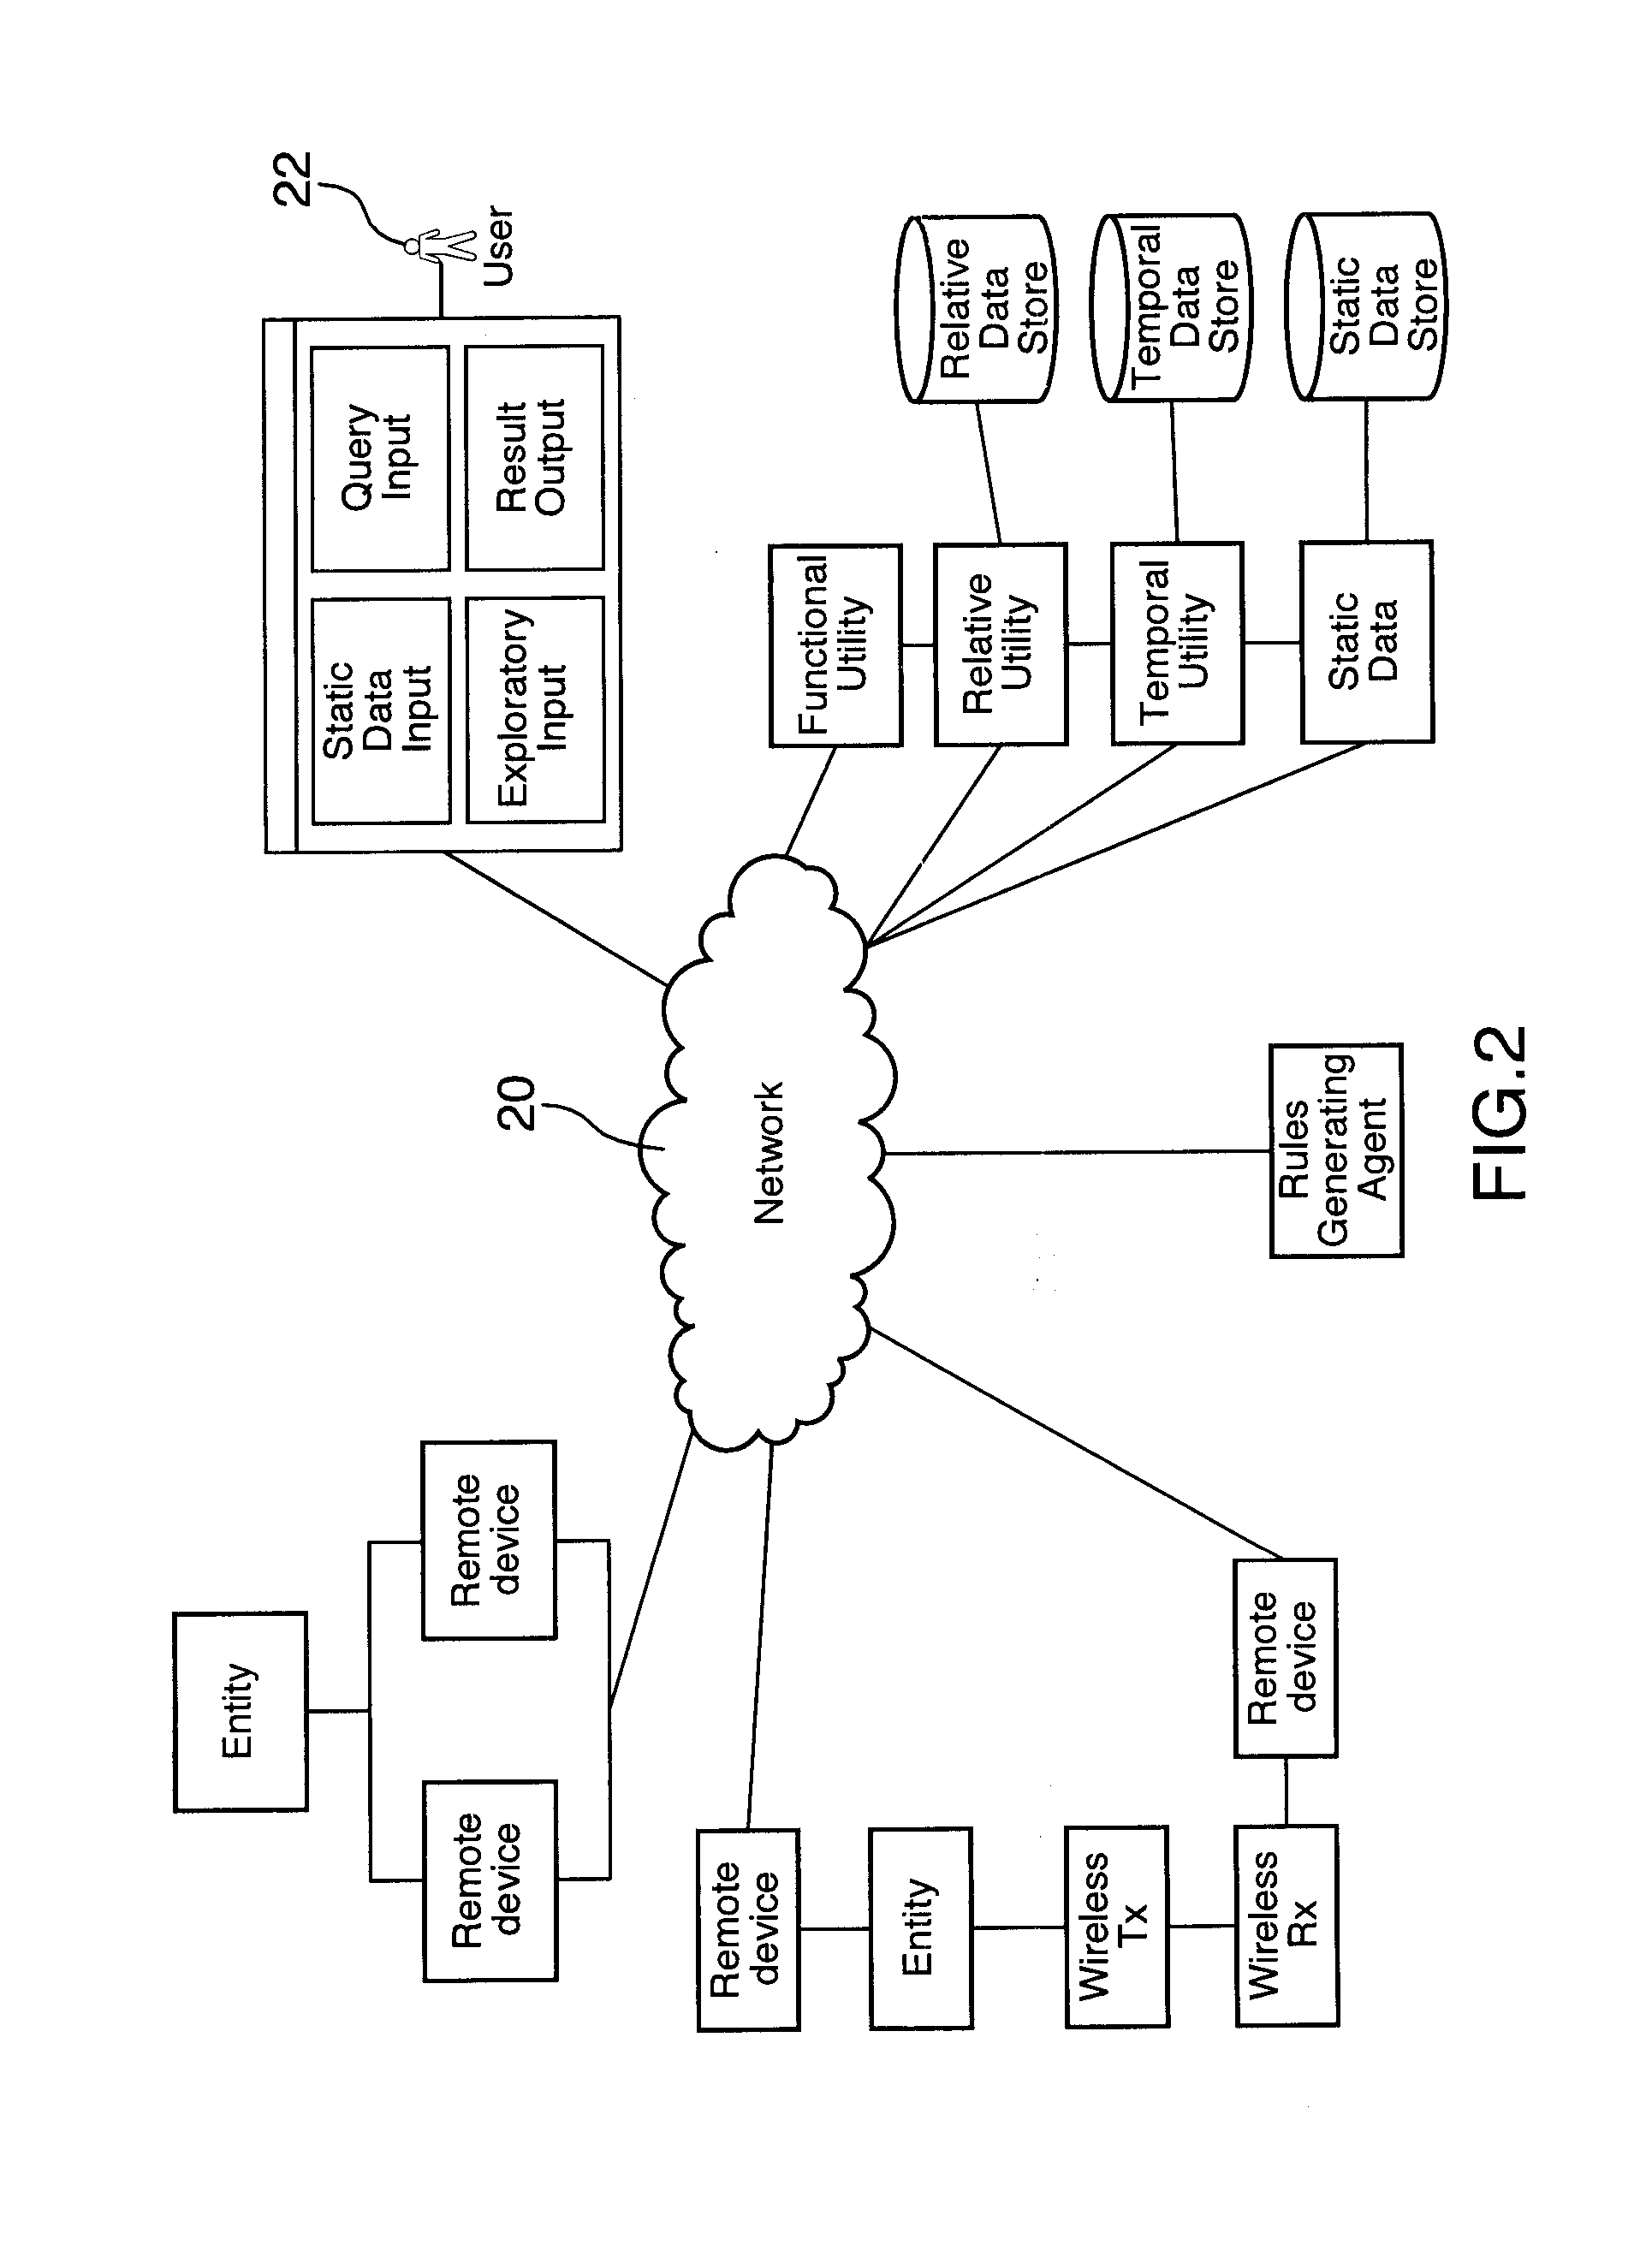 System, method and computer program for multi-dimensional temporal and relative data mining framework, analysis & sub-grouping